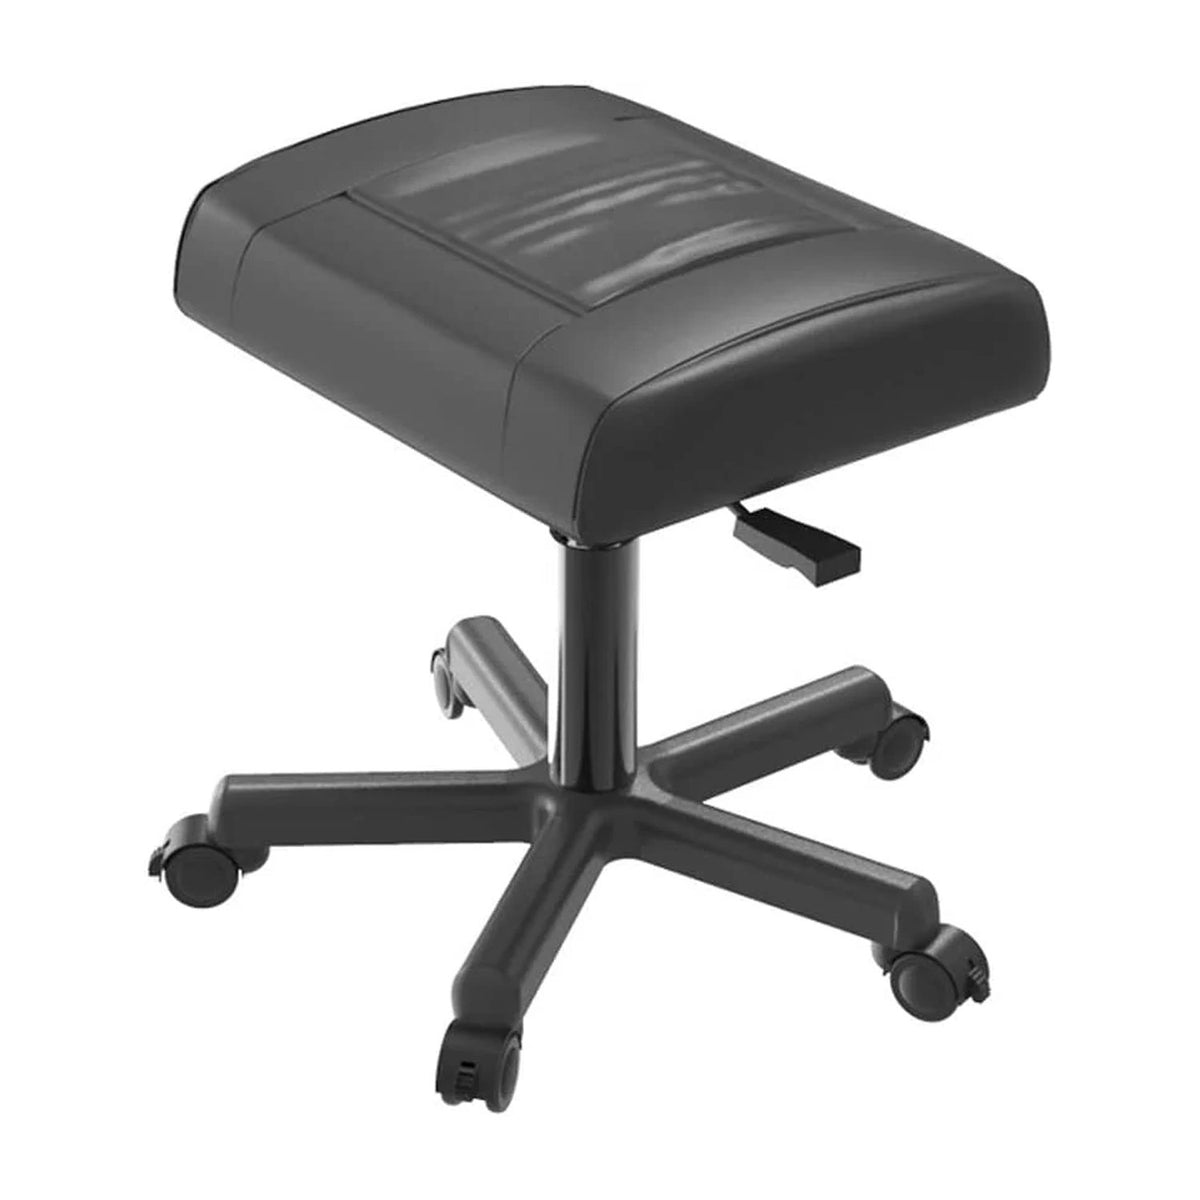 SmileSellers PU Leather Foot Stool with Wheels, Office Footrests, Height Adjustable Rolling Leg Rest, Computer Foot Rest Under Desk at Work, Small Footstool Relax Chair Gaming,Black